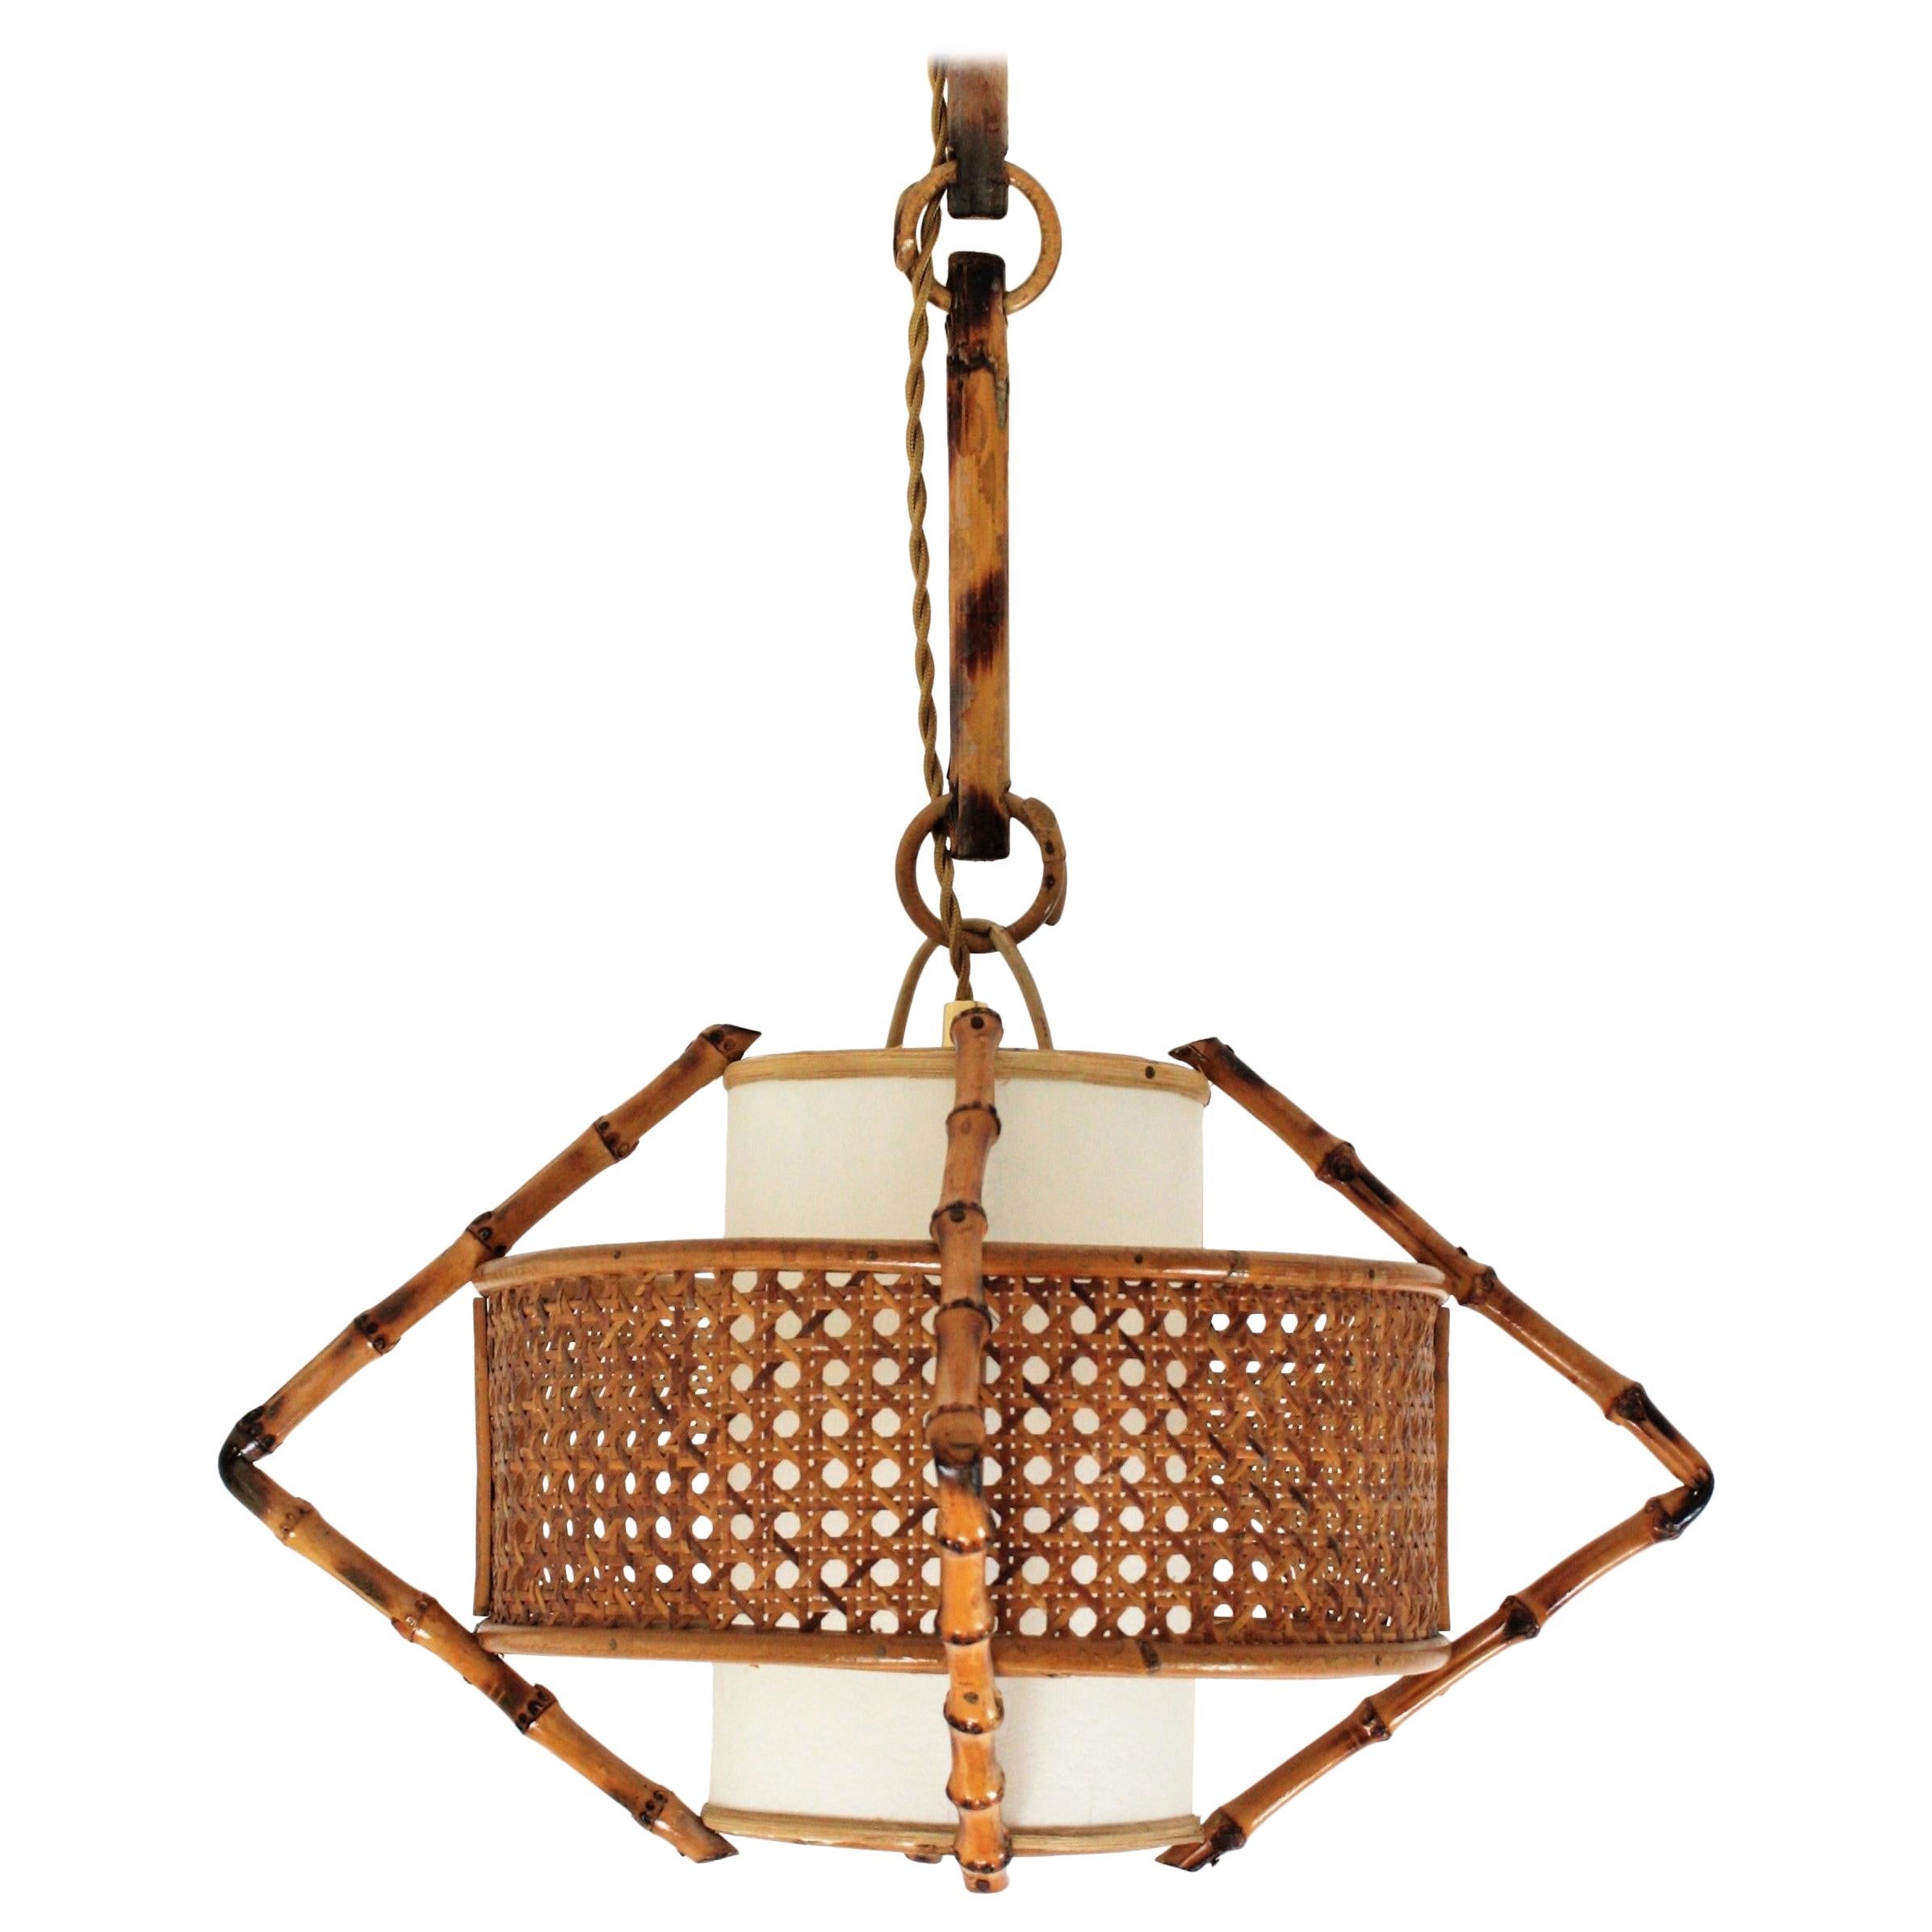 Spanish Modernist Bamboo Rattan and Wicker Pendant Lamp with Tiki Accents, 1950s